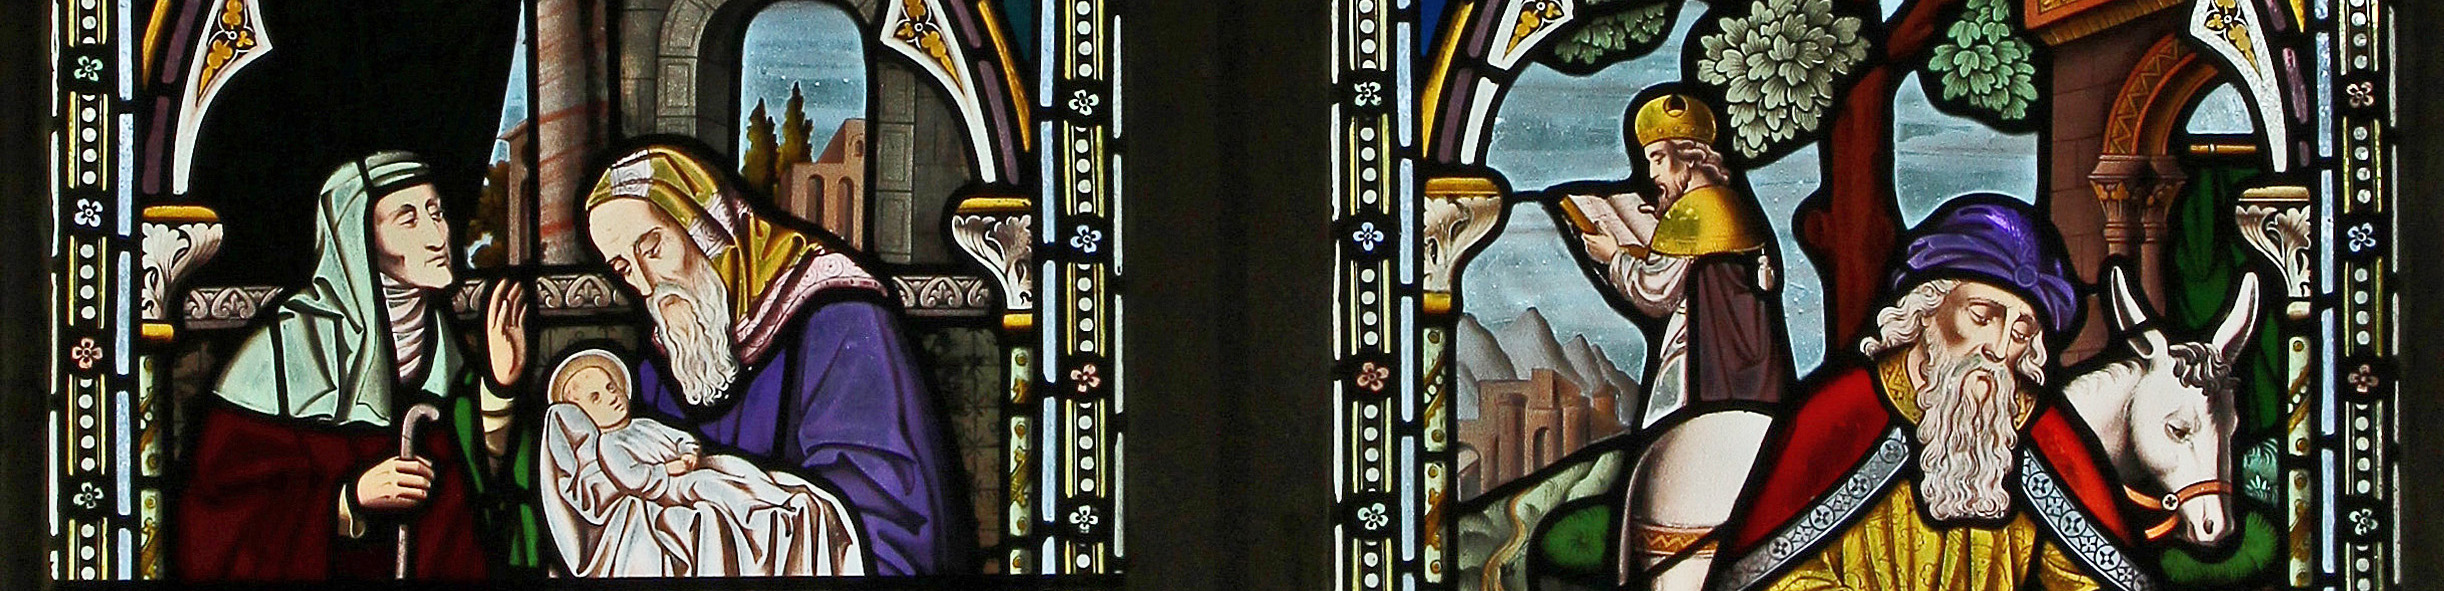 Details from south chancel Window